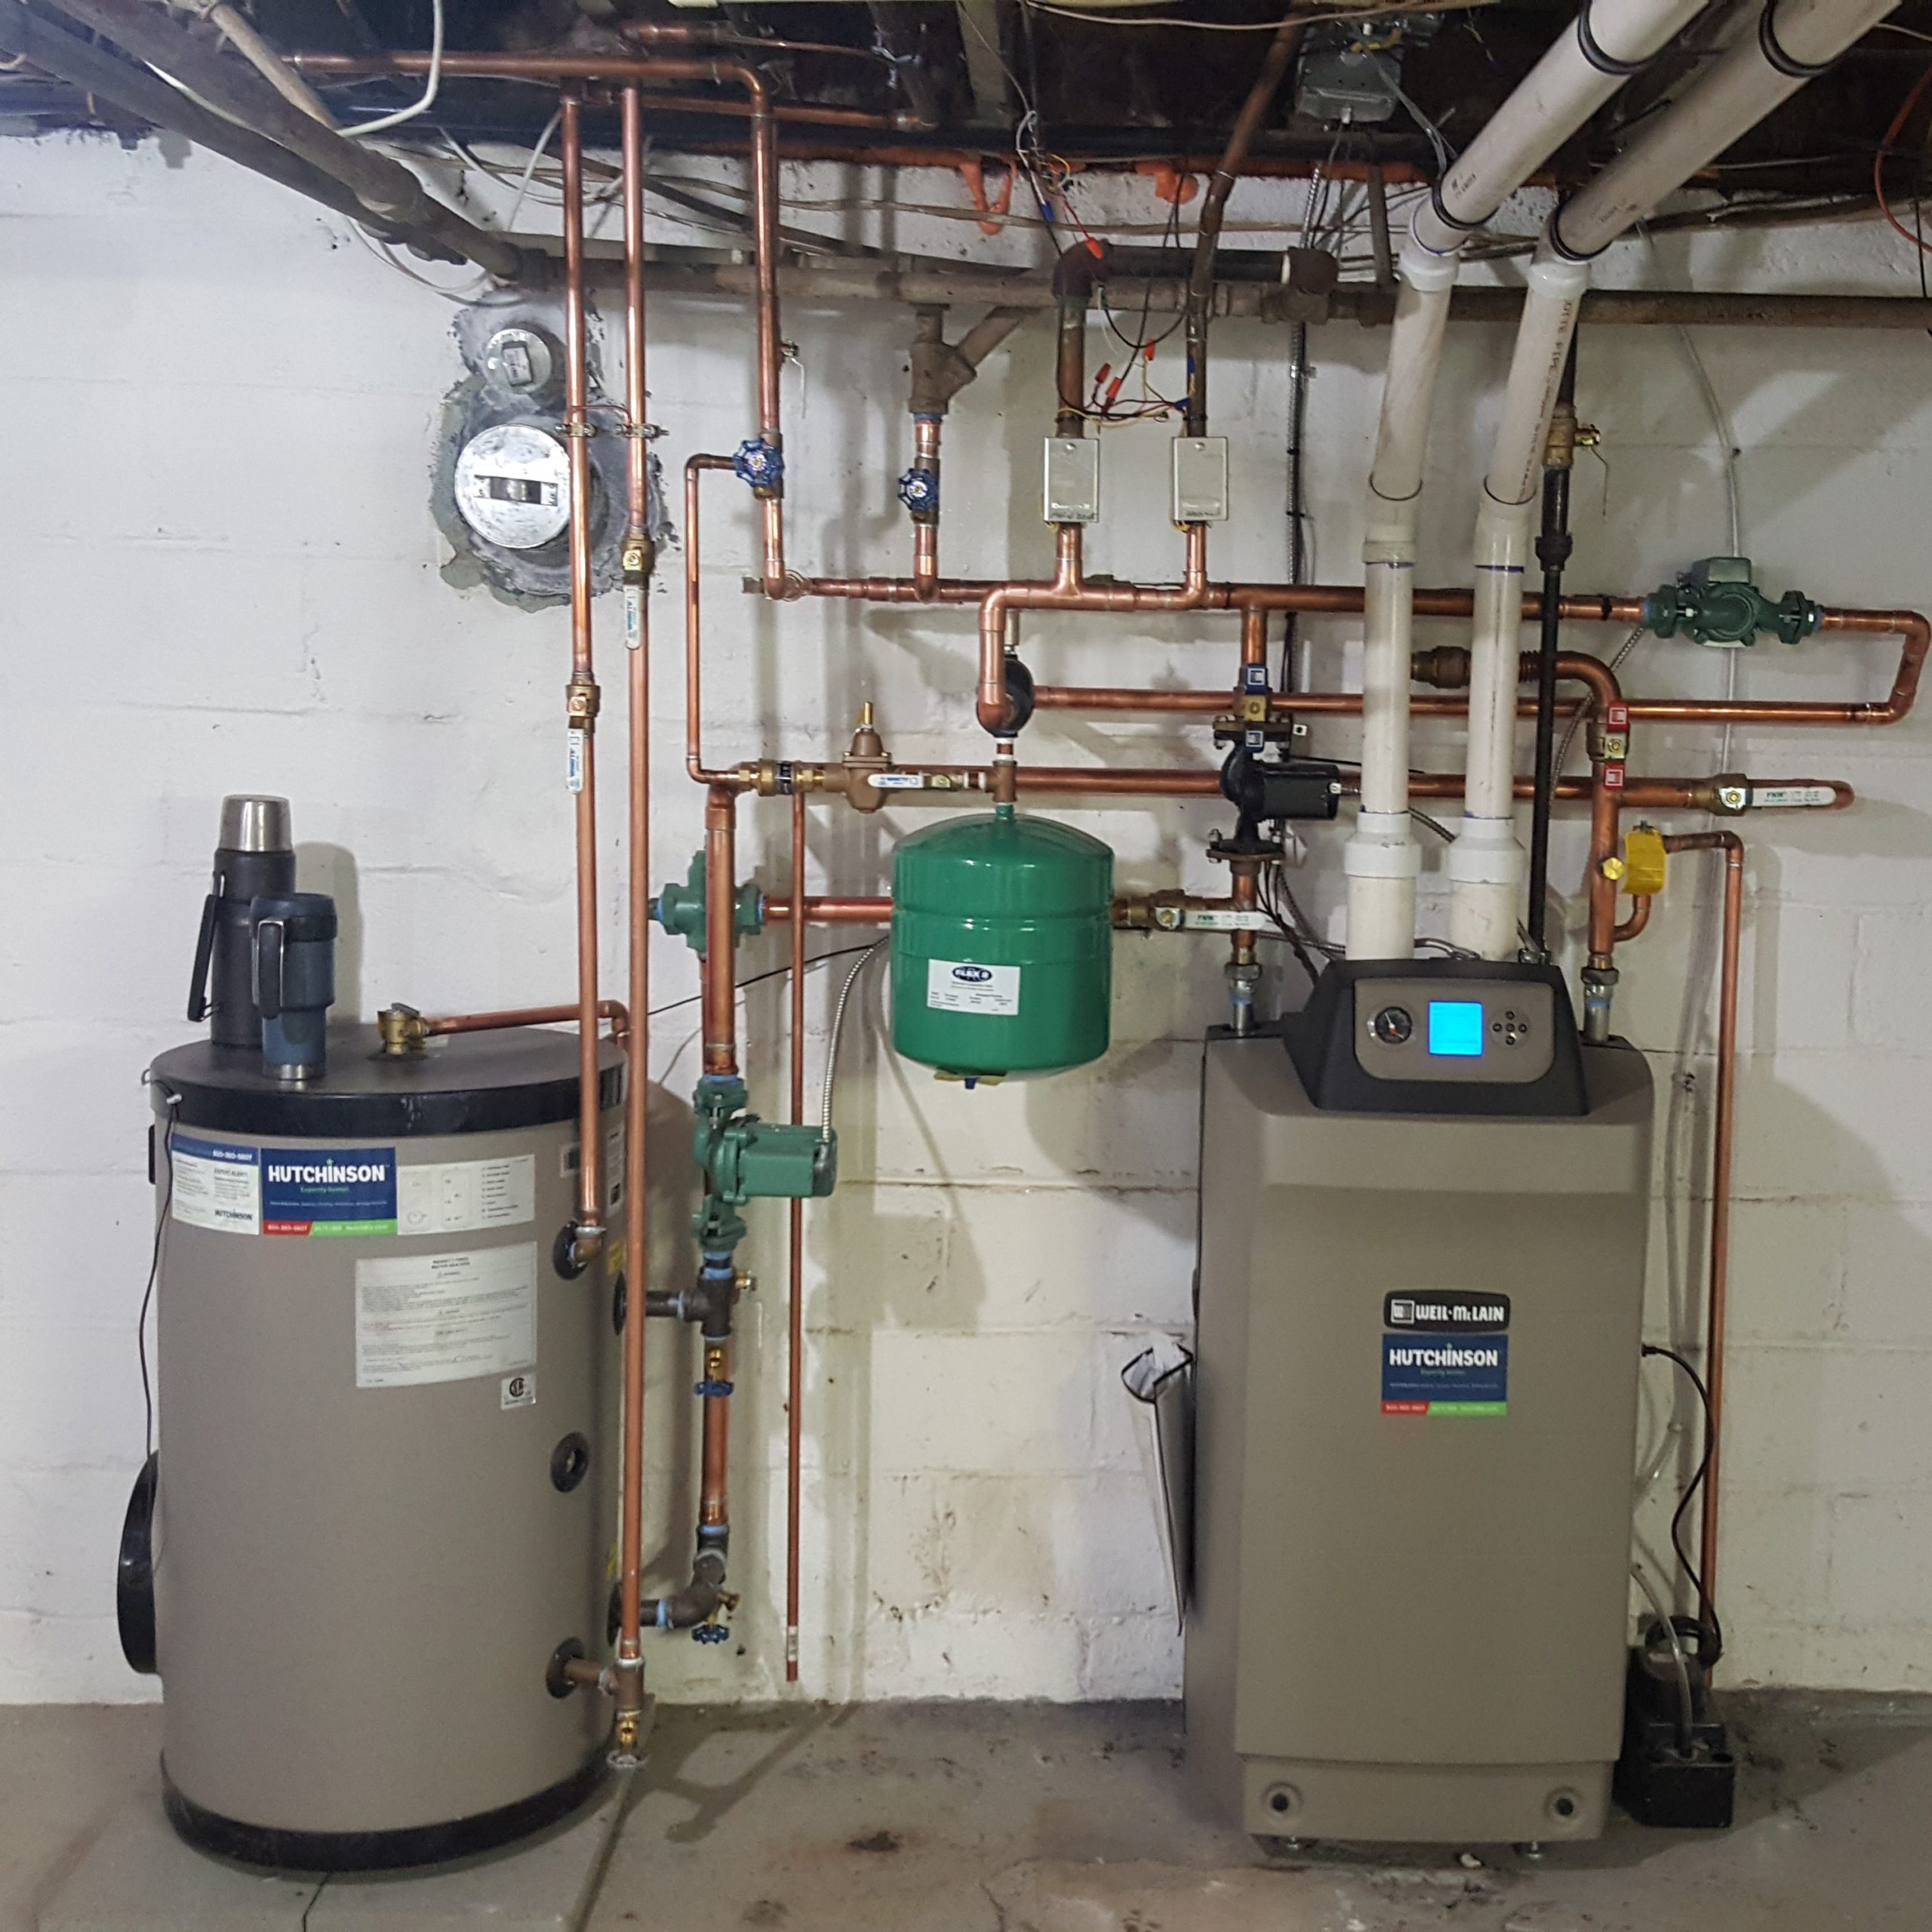 Plumbing, Heating and Air Conditioning Services in Paulsboro, NJ